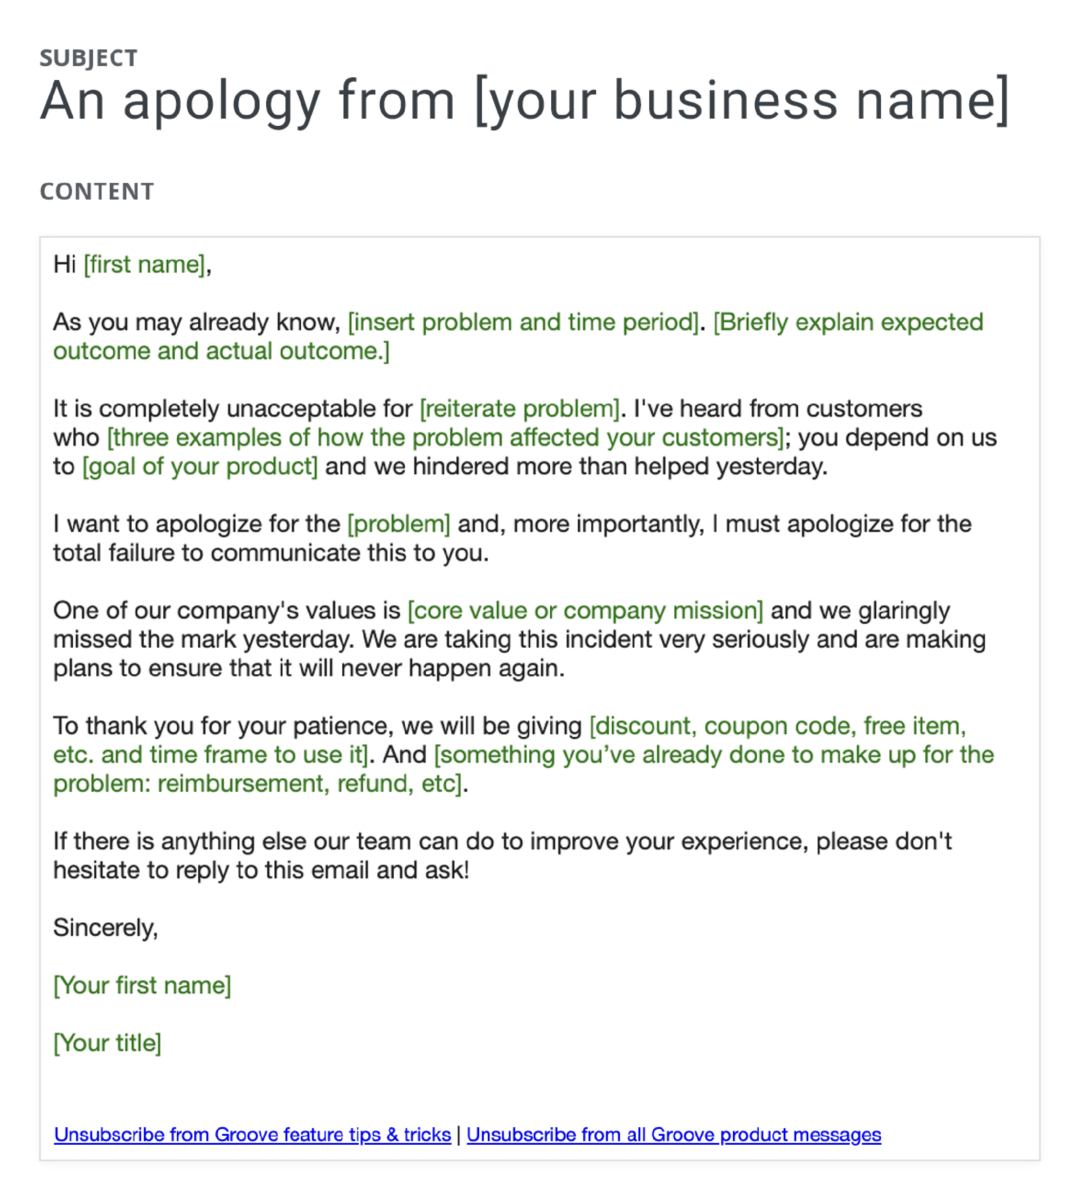 business-apology-email-example-for-customer-service-a-personalized